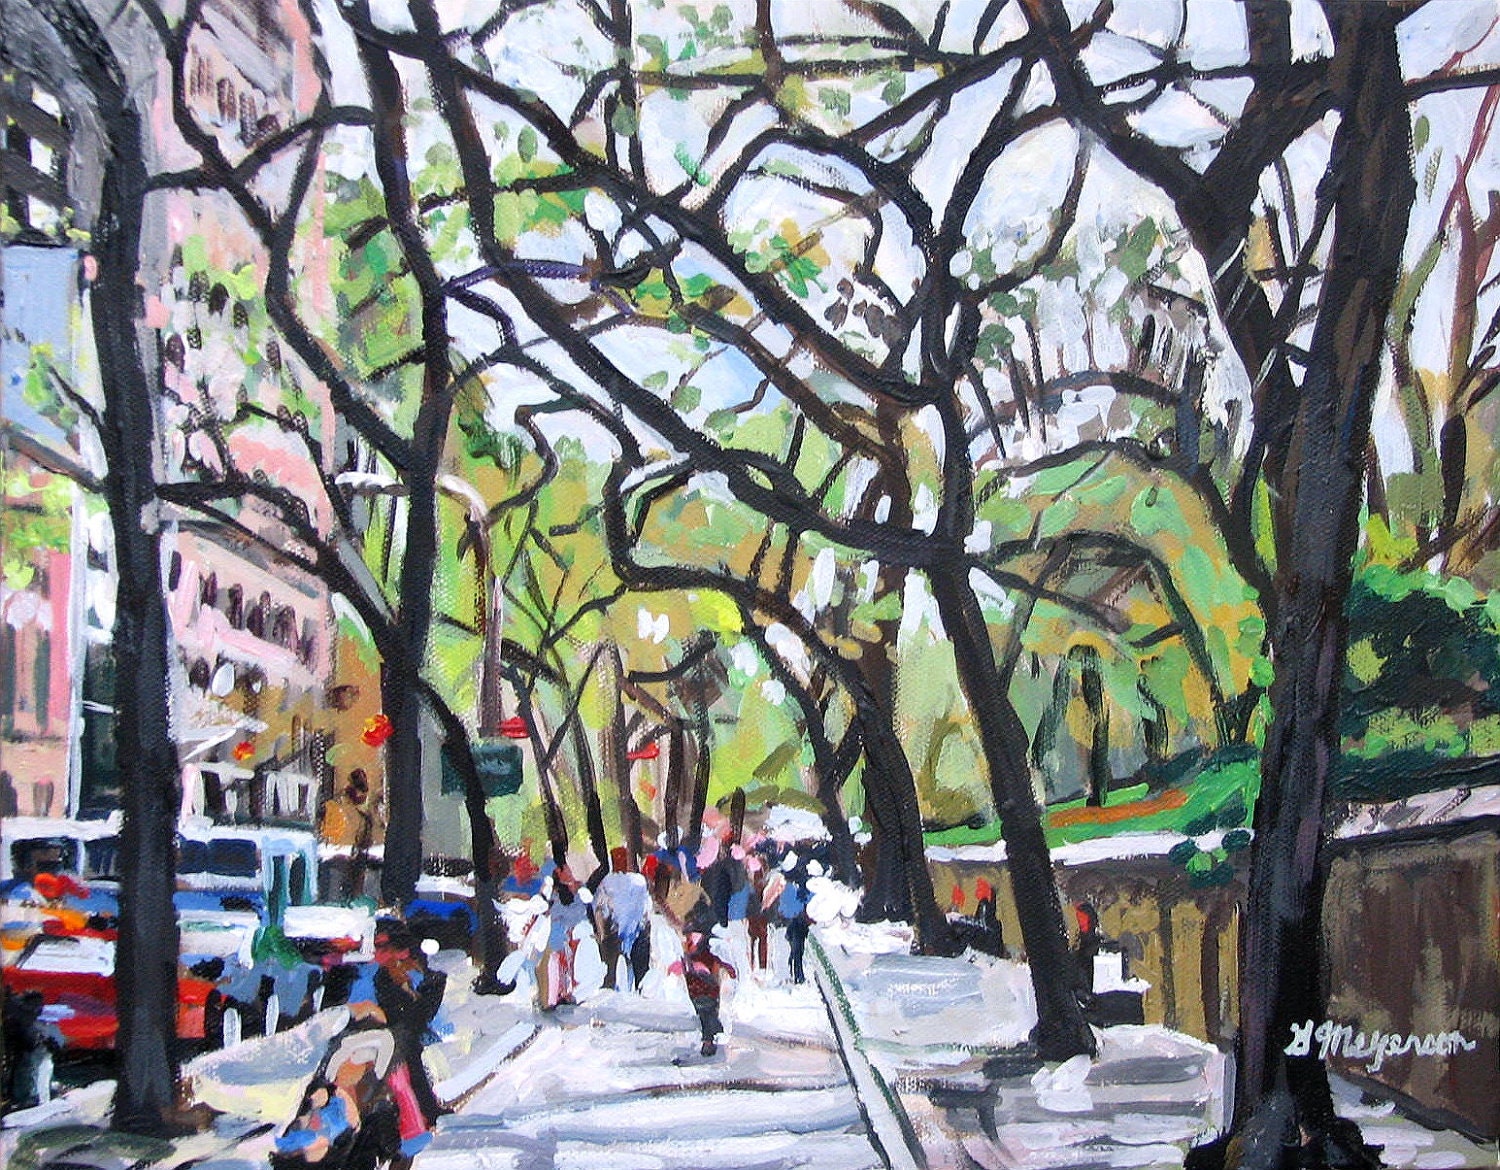 Spring Fine Art Print 8x10, "Trees On Fifth Avenue" New York City Cityscape Green Brown Painting by Gwen Meyerson